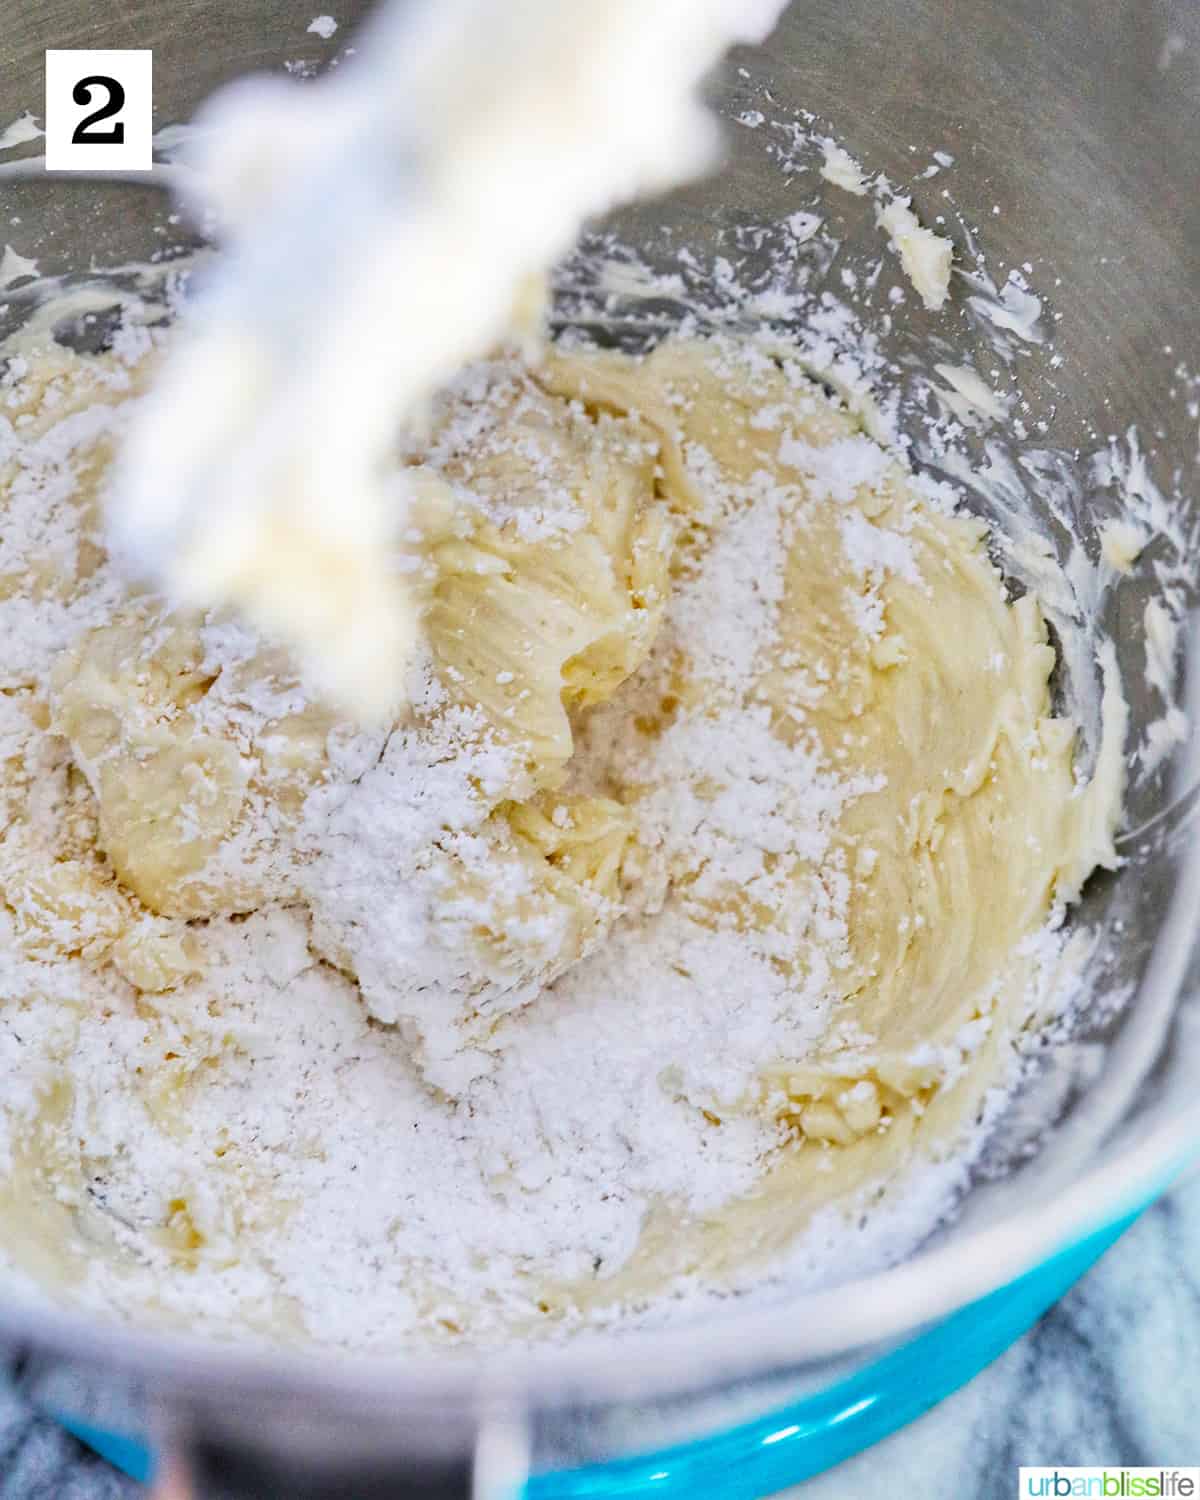 adding powdered sugar to butter to make buttercream frosting.